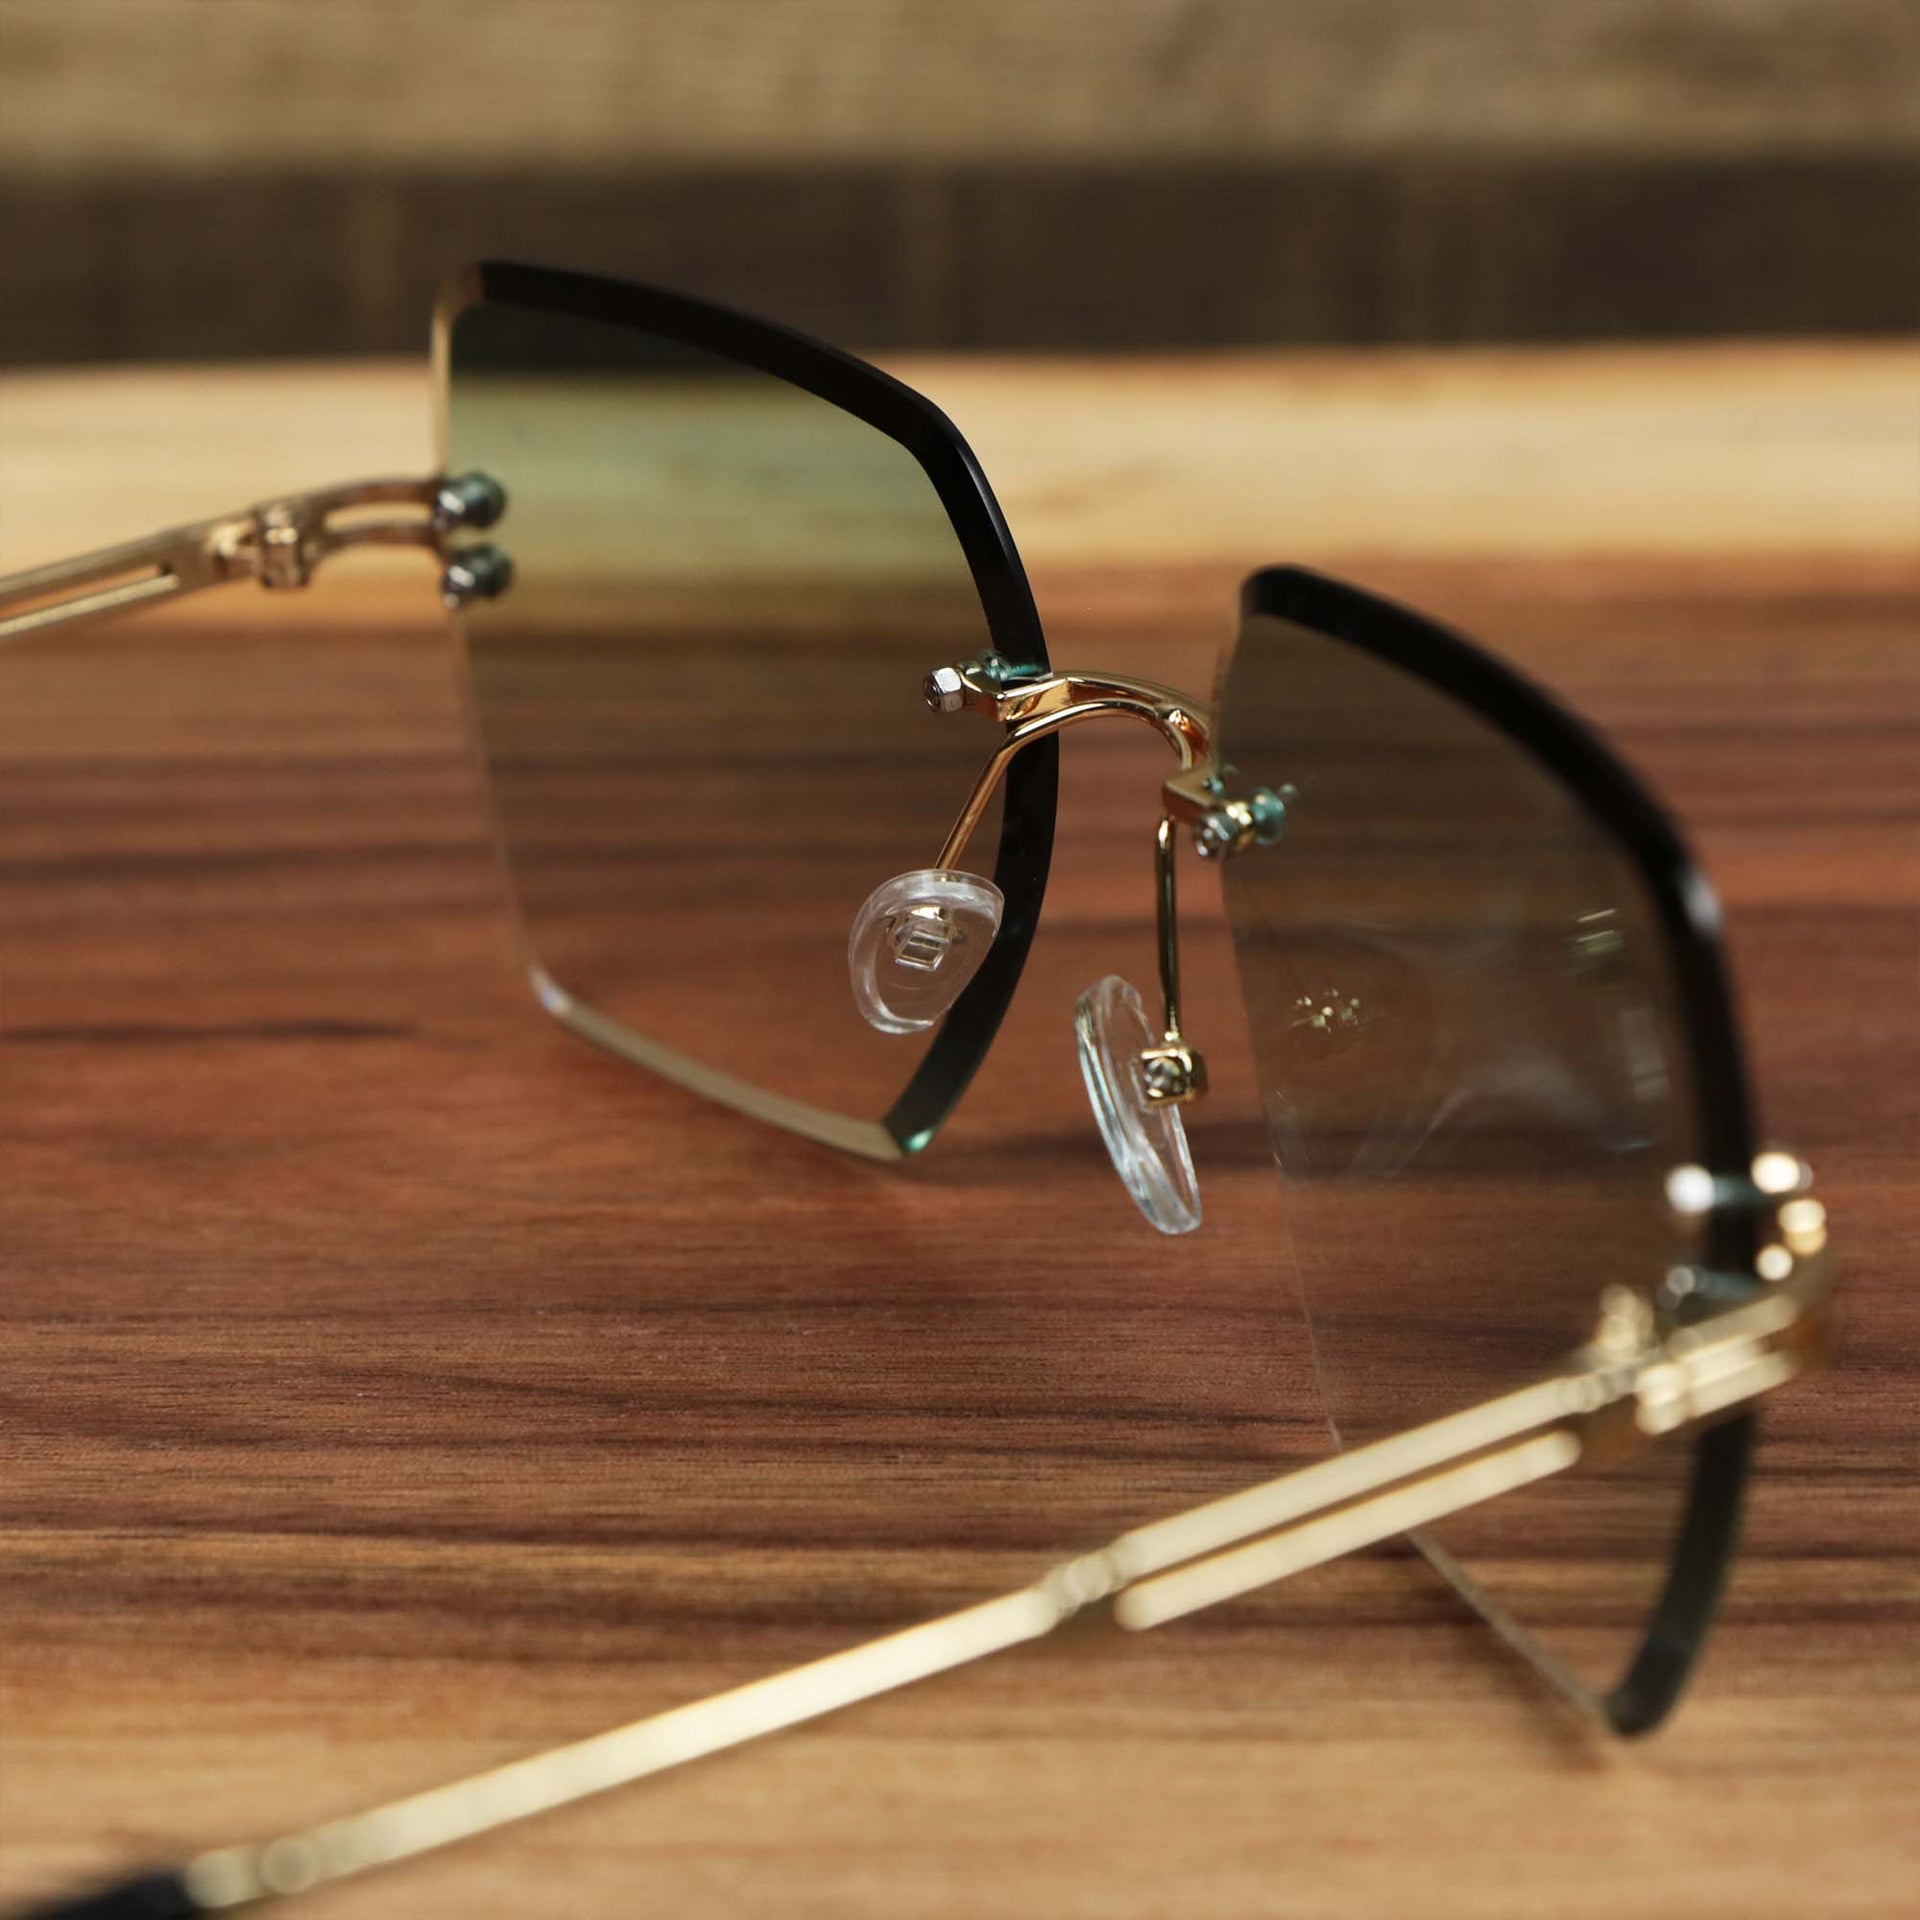 The inside of the Large Lightweight Frame Green Lens Sunglasses with Gold Frame